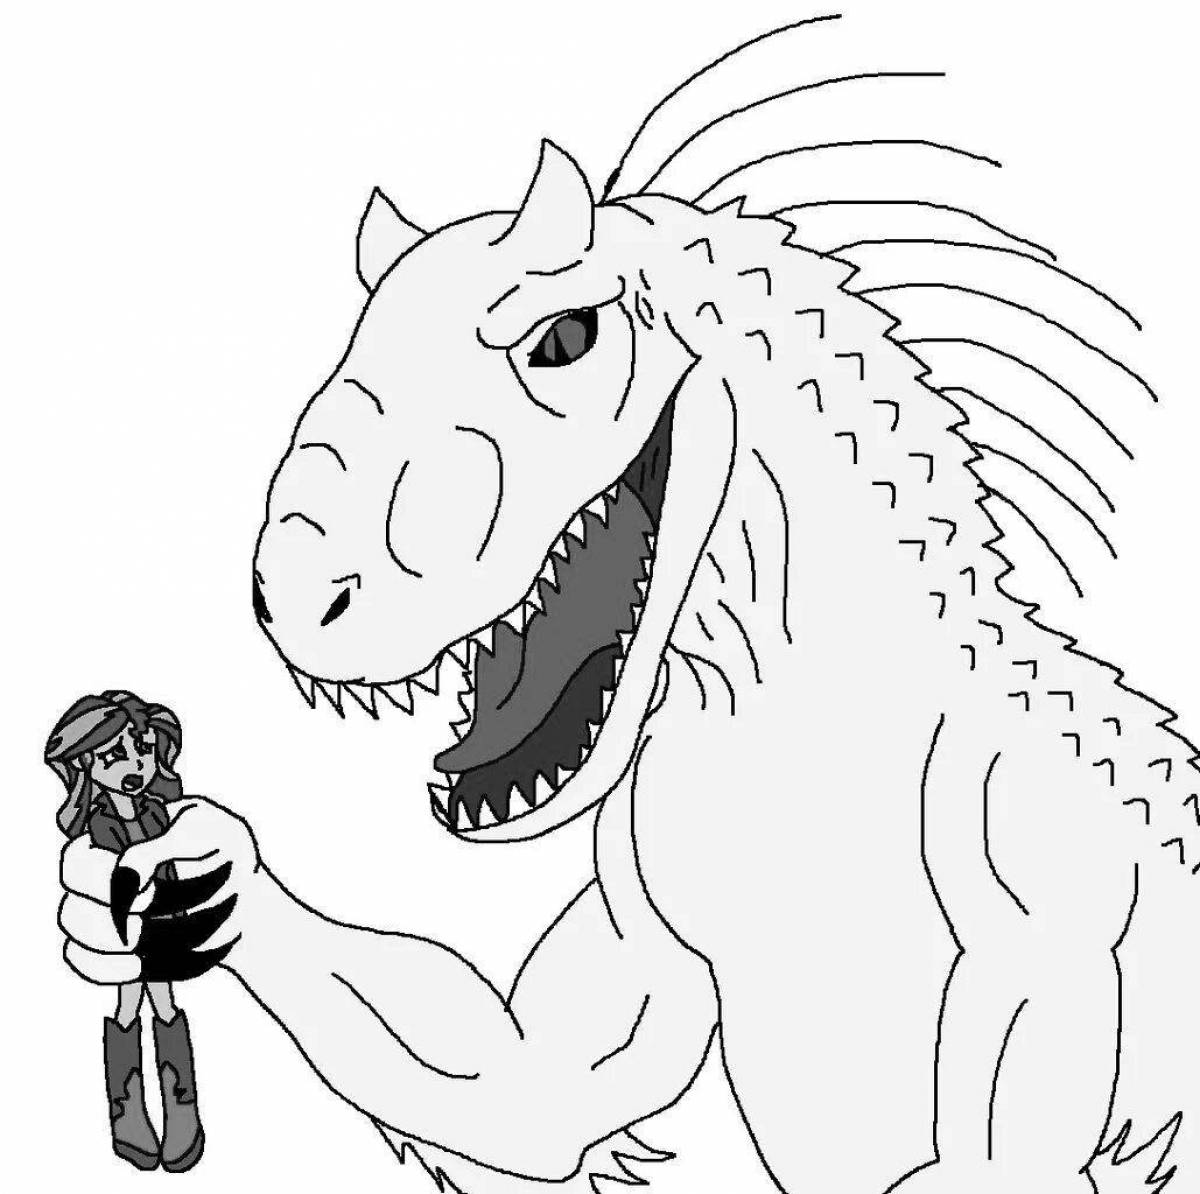 Amazing indominus rex coloring book for kids